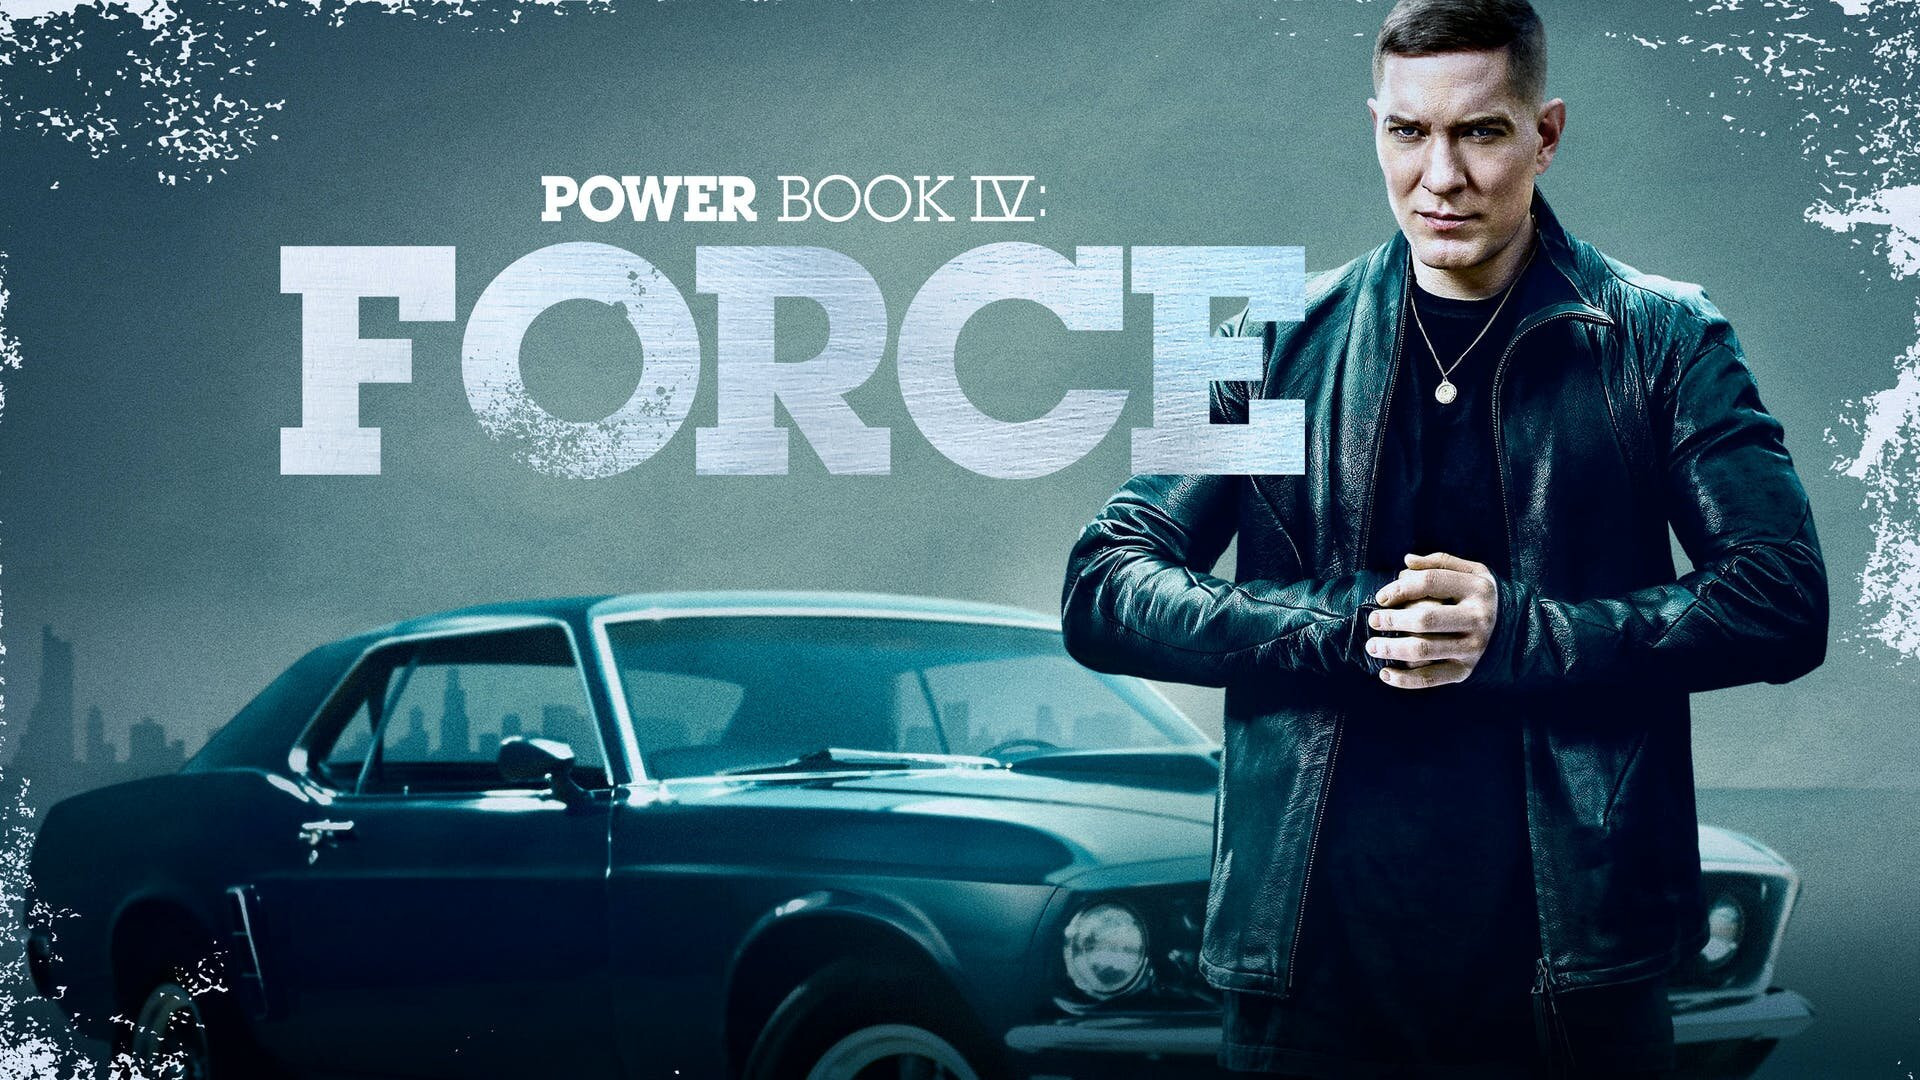 Show Power Book IV: Force